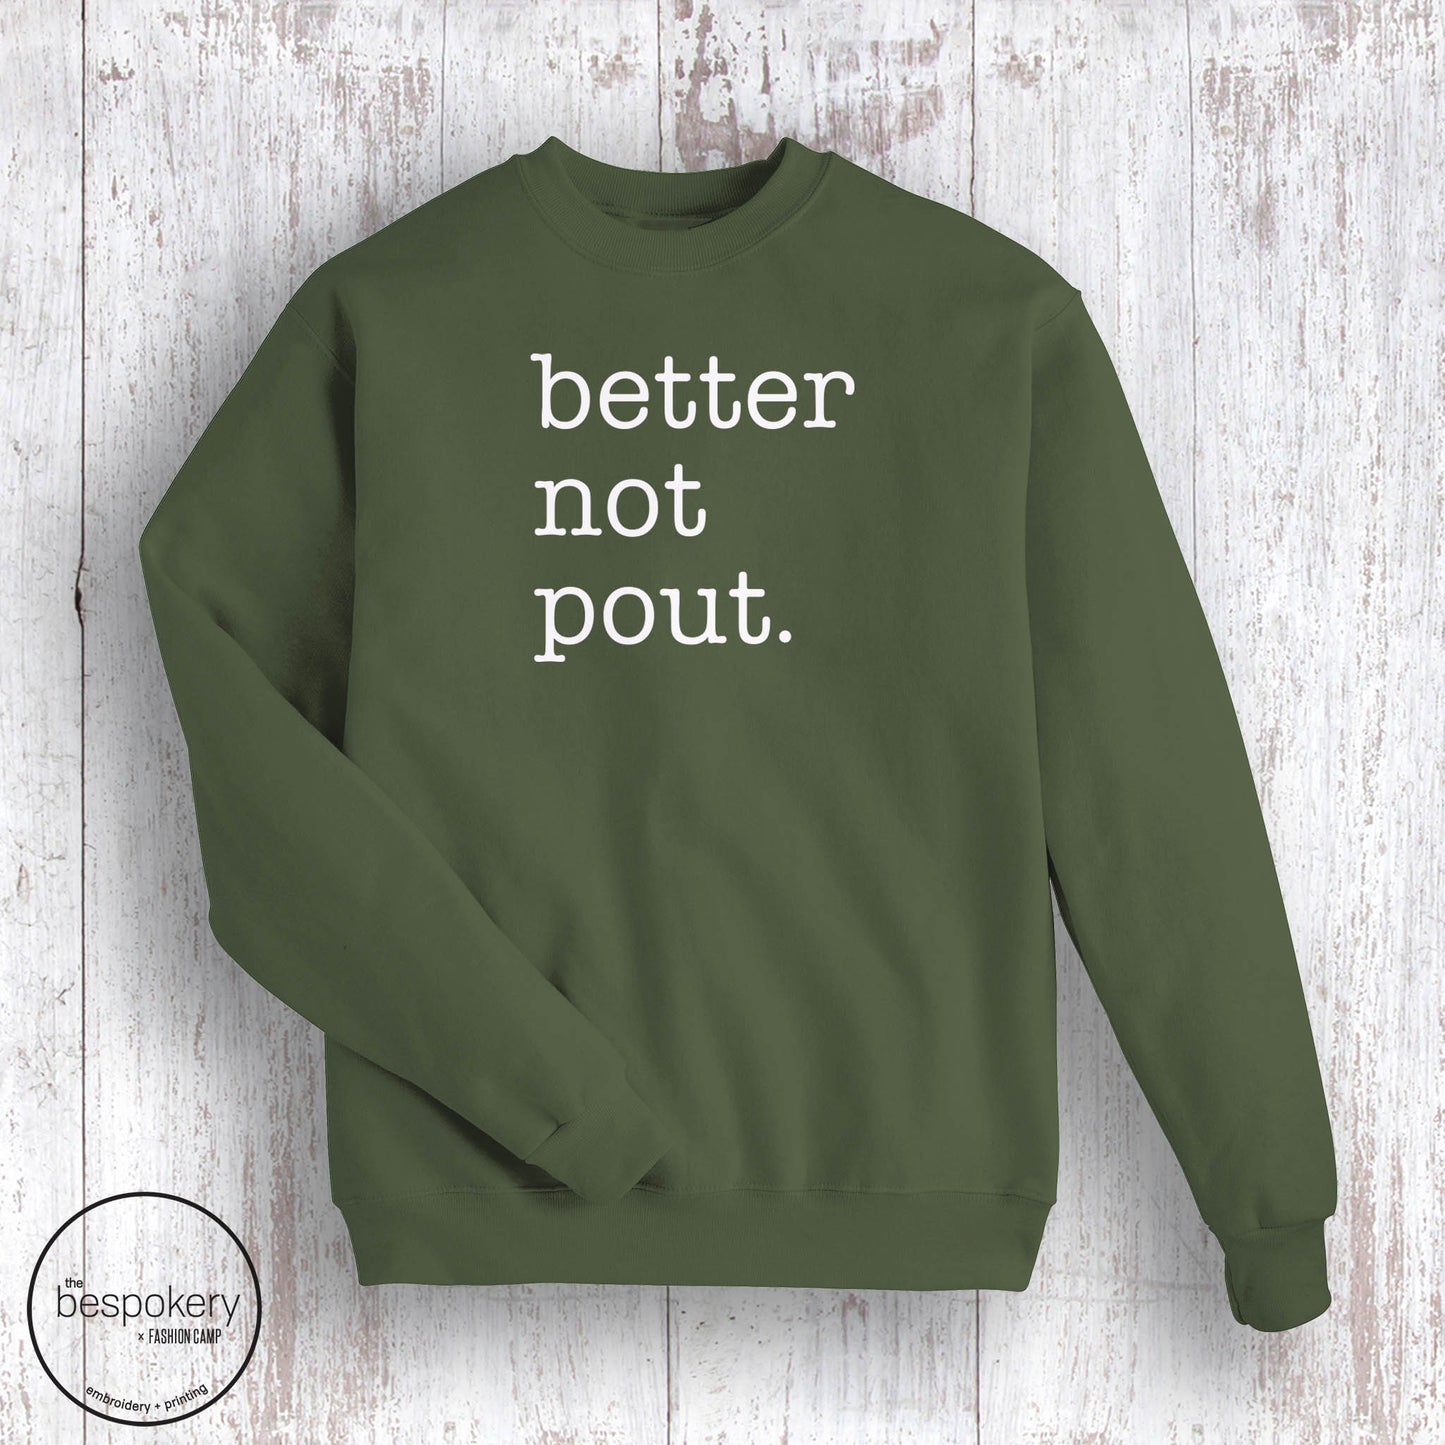 "Better Not Pout." - Military Green Sweatshirt (Adult Only)